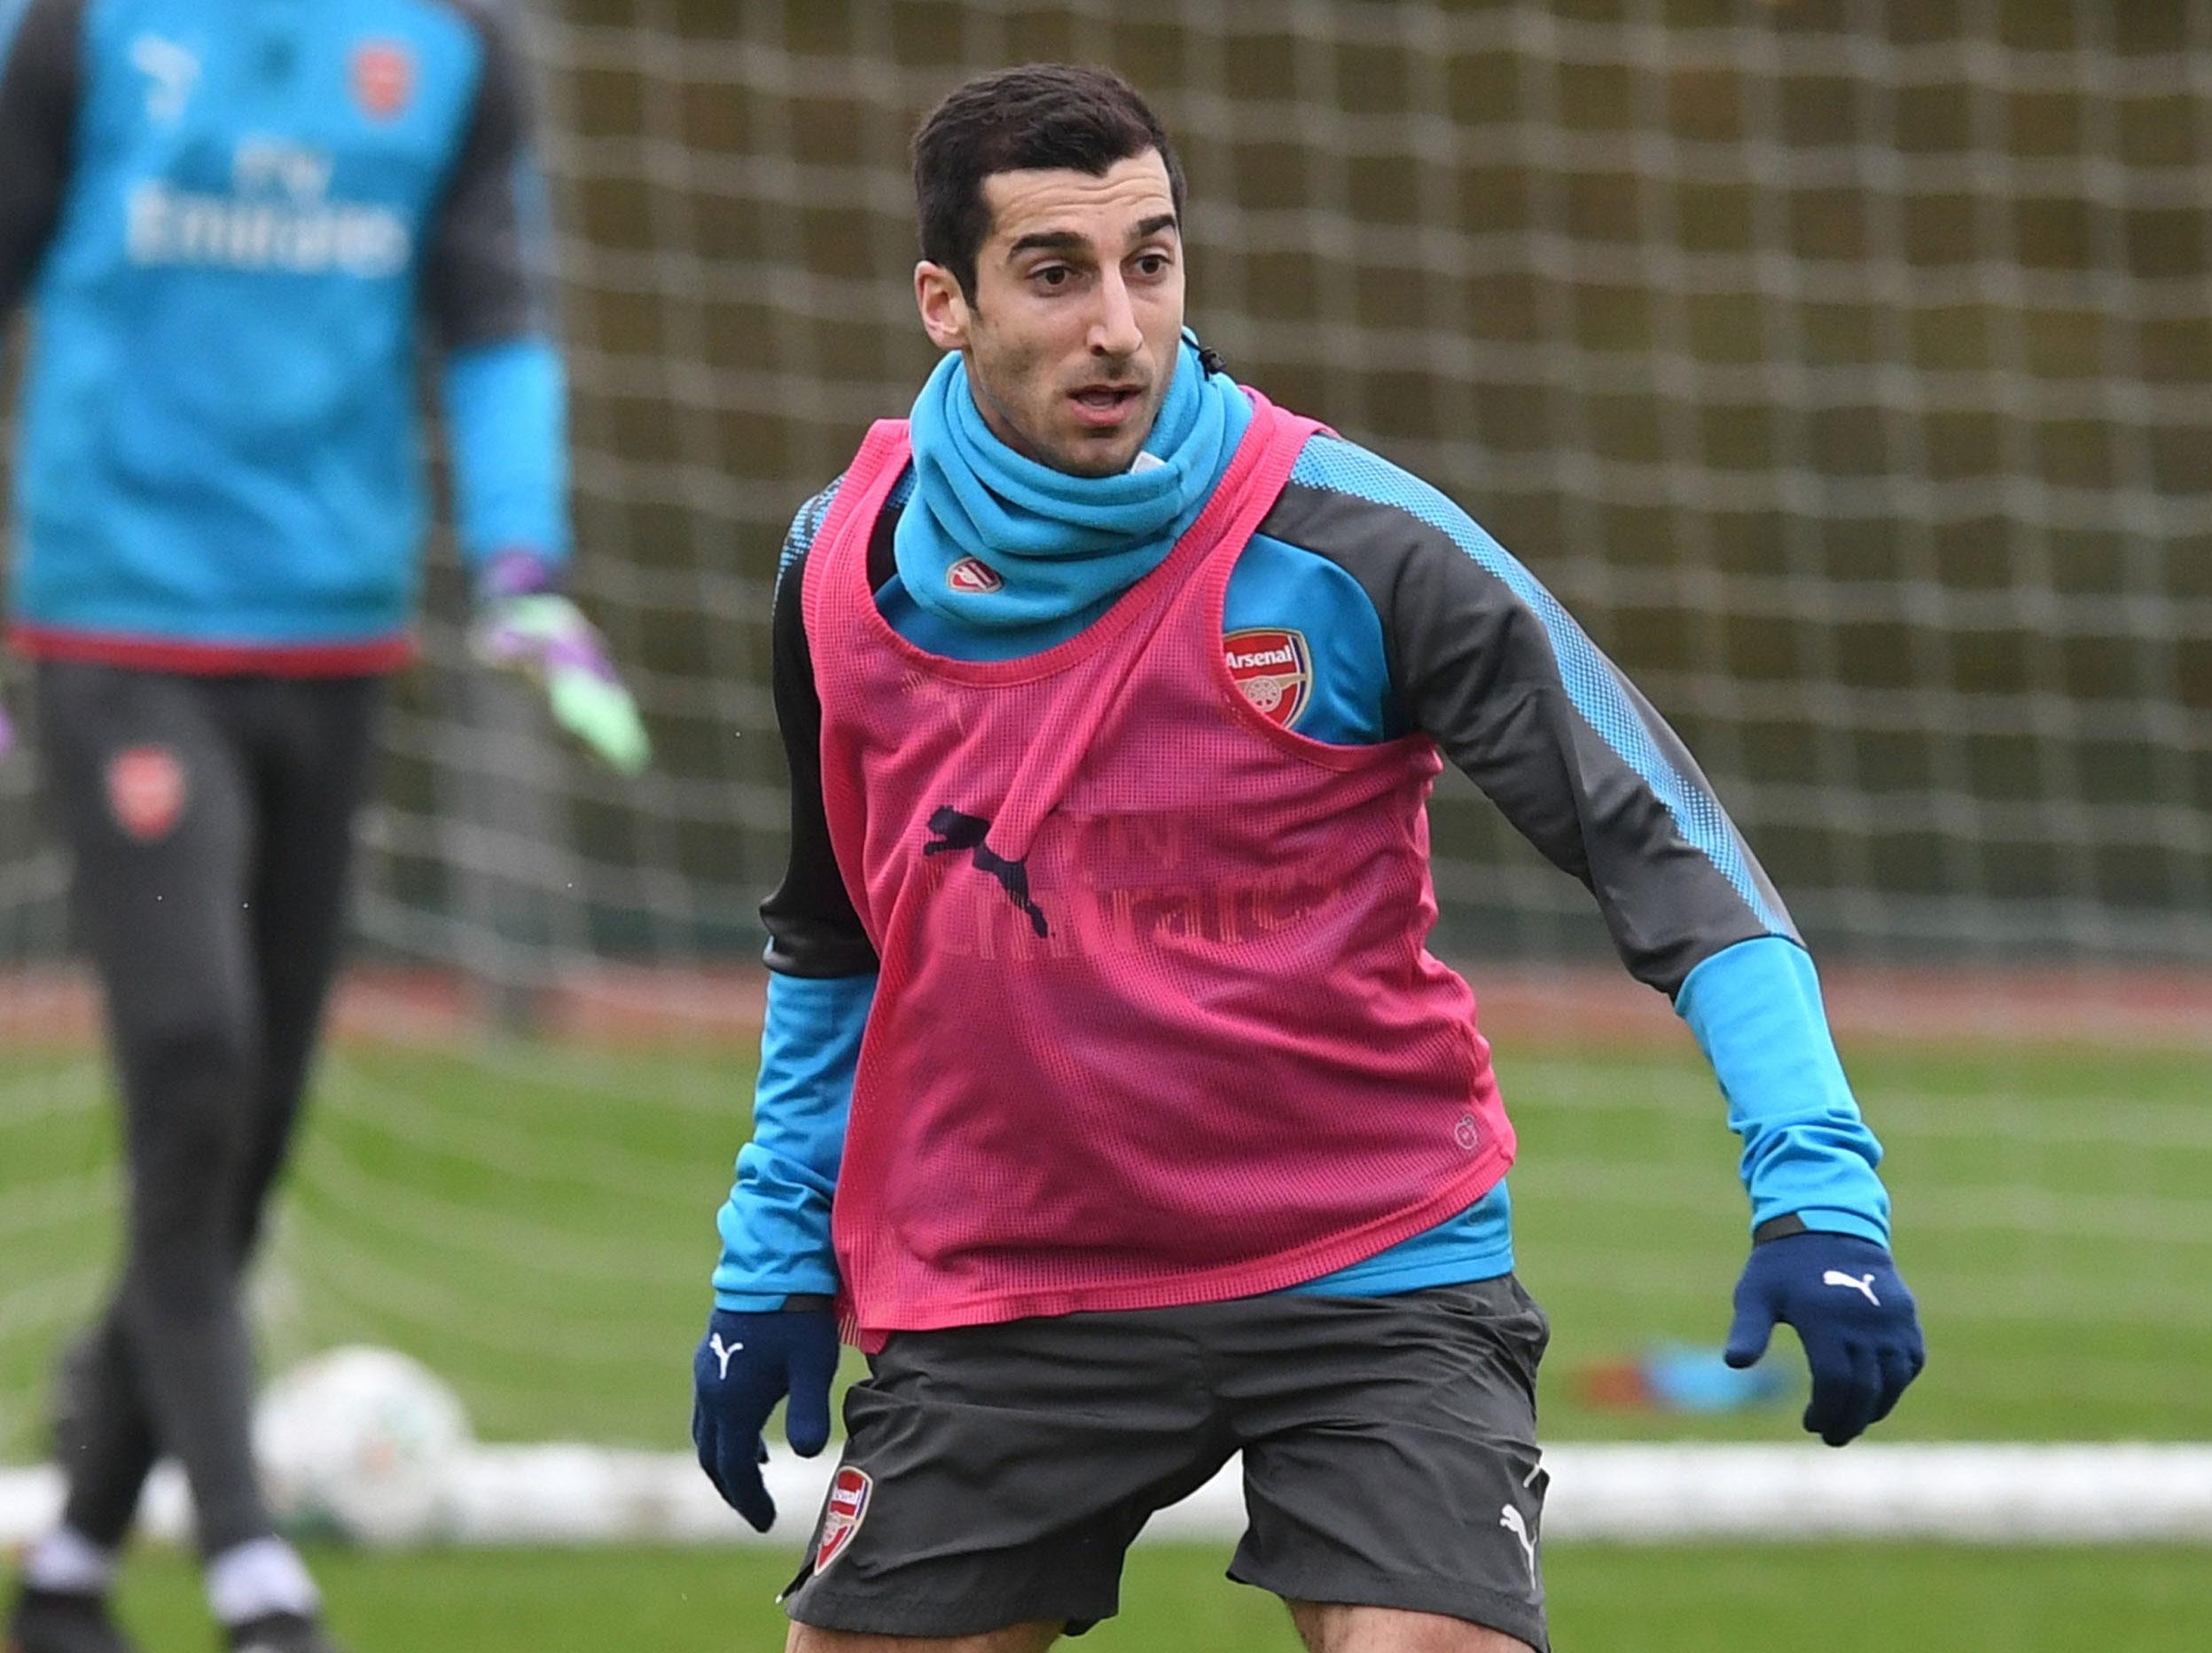 Henrikh Mkhitaryan is set to make his first appearance for the Gunners on Tuesday